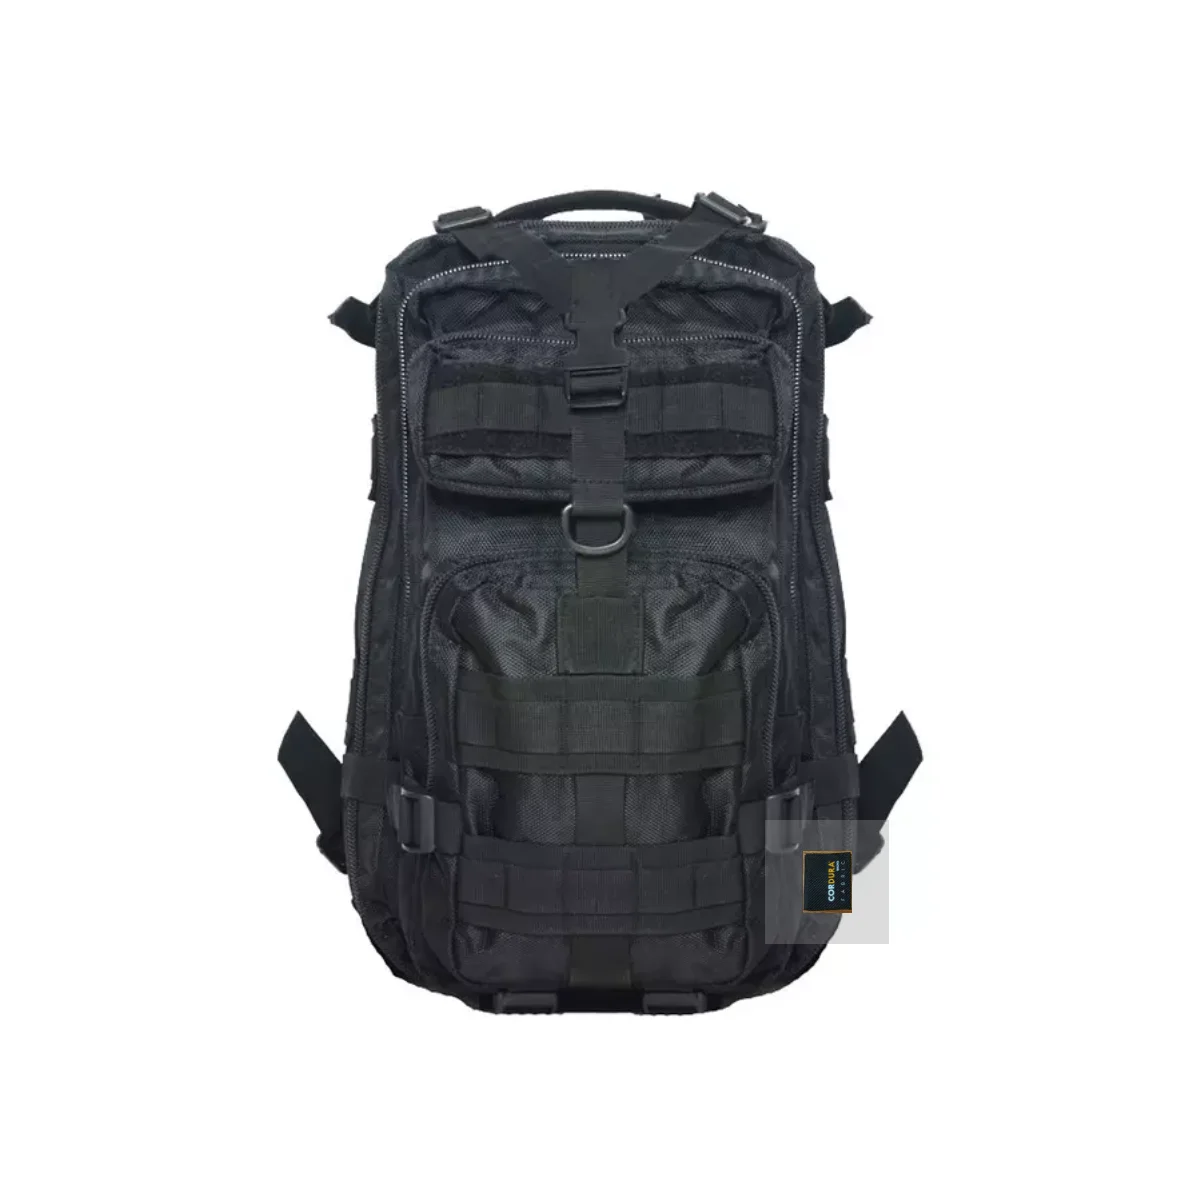 BC Polic Mvg Tactic Waterproof Molle System Nerf Gun Armi Tactic Backpack